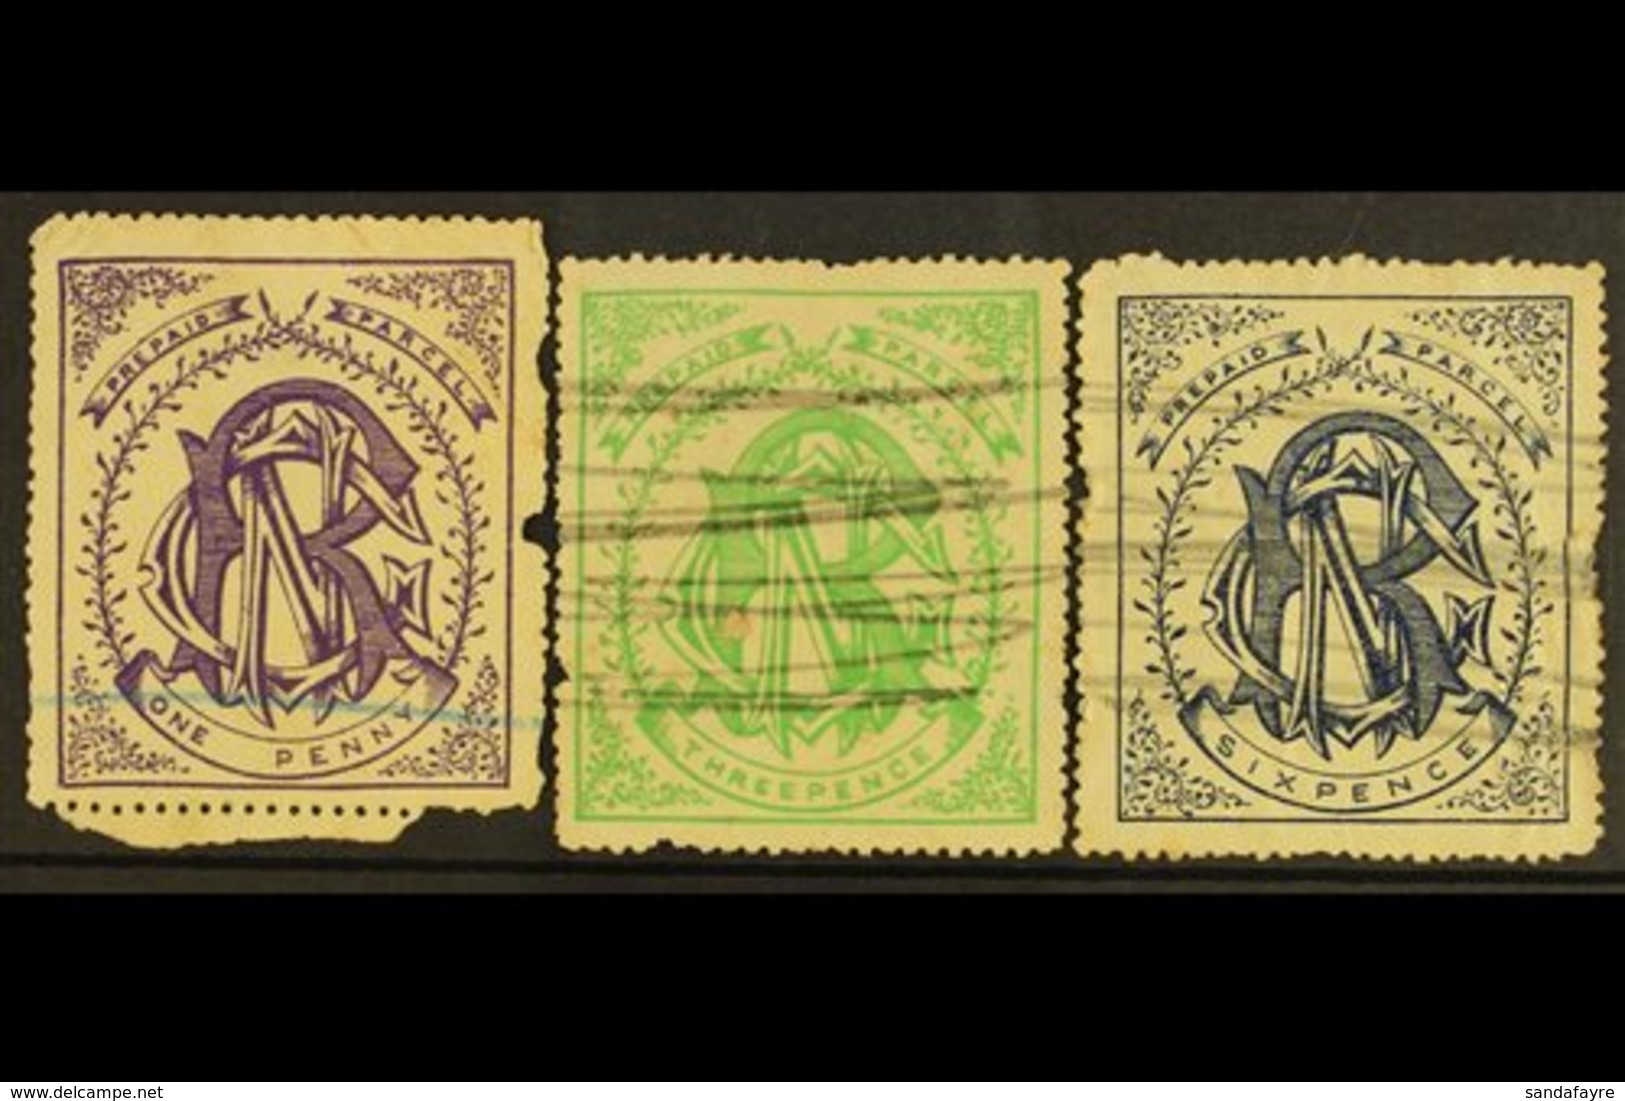 \Y NATAL\Y NATAL GOVERNMENT RAILWAY 1880 1d Violet, 3d Green & 6d Blue, Used With Faults, A Rare Trio (3 Stamps) For Mor - Unclassified